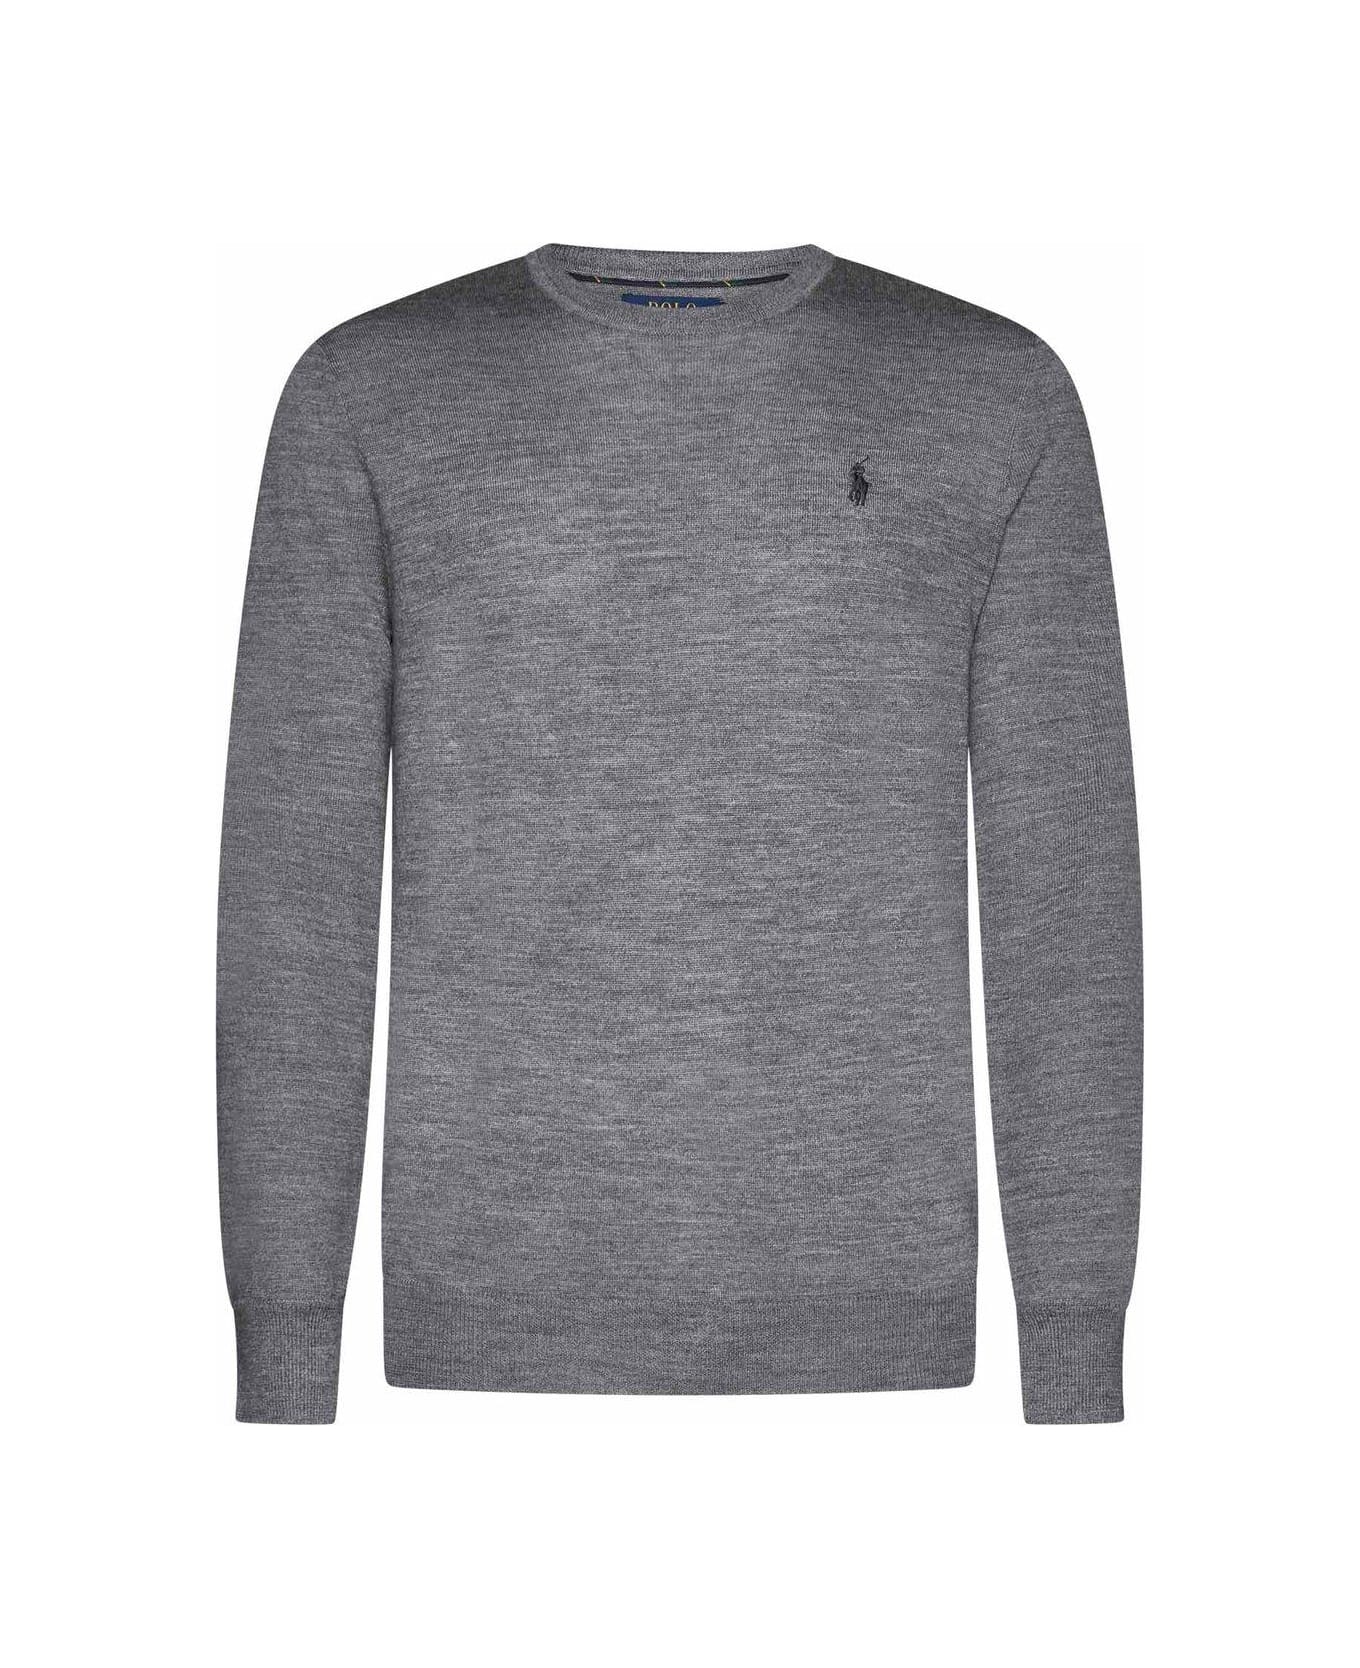 Ralph Lauren Pony Embroidered Knit Jumper - Fawn Grey Heather